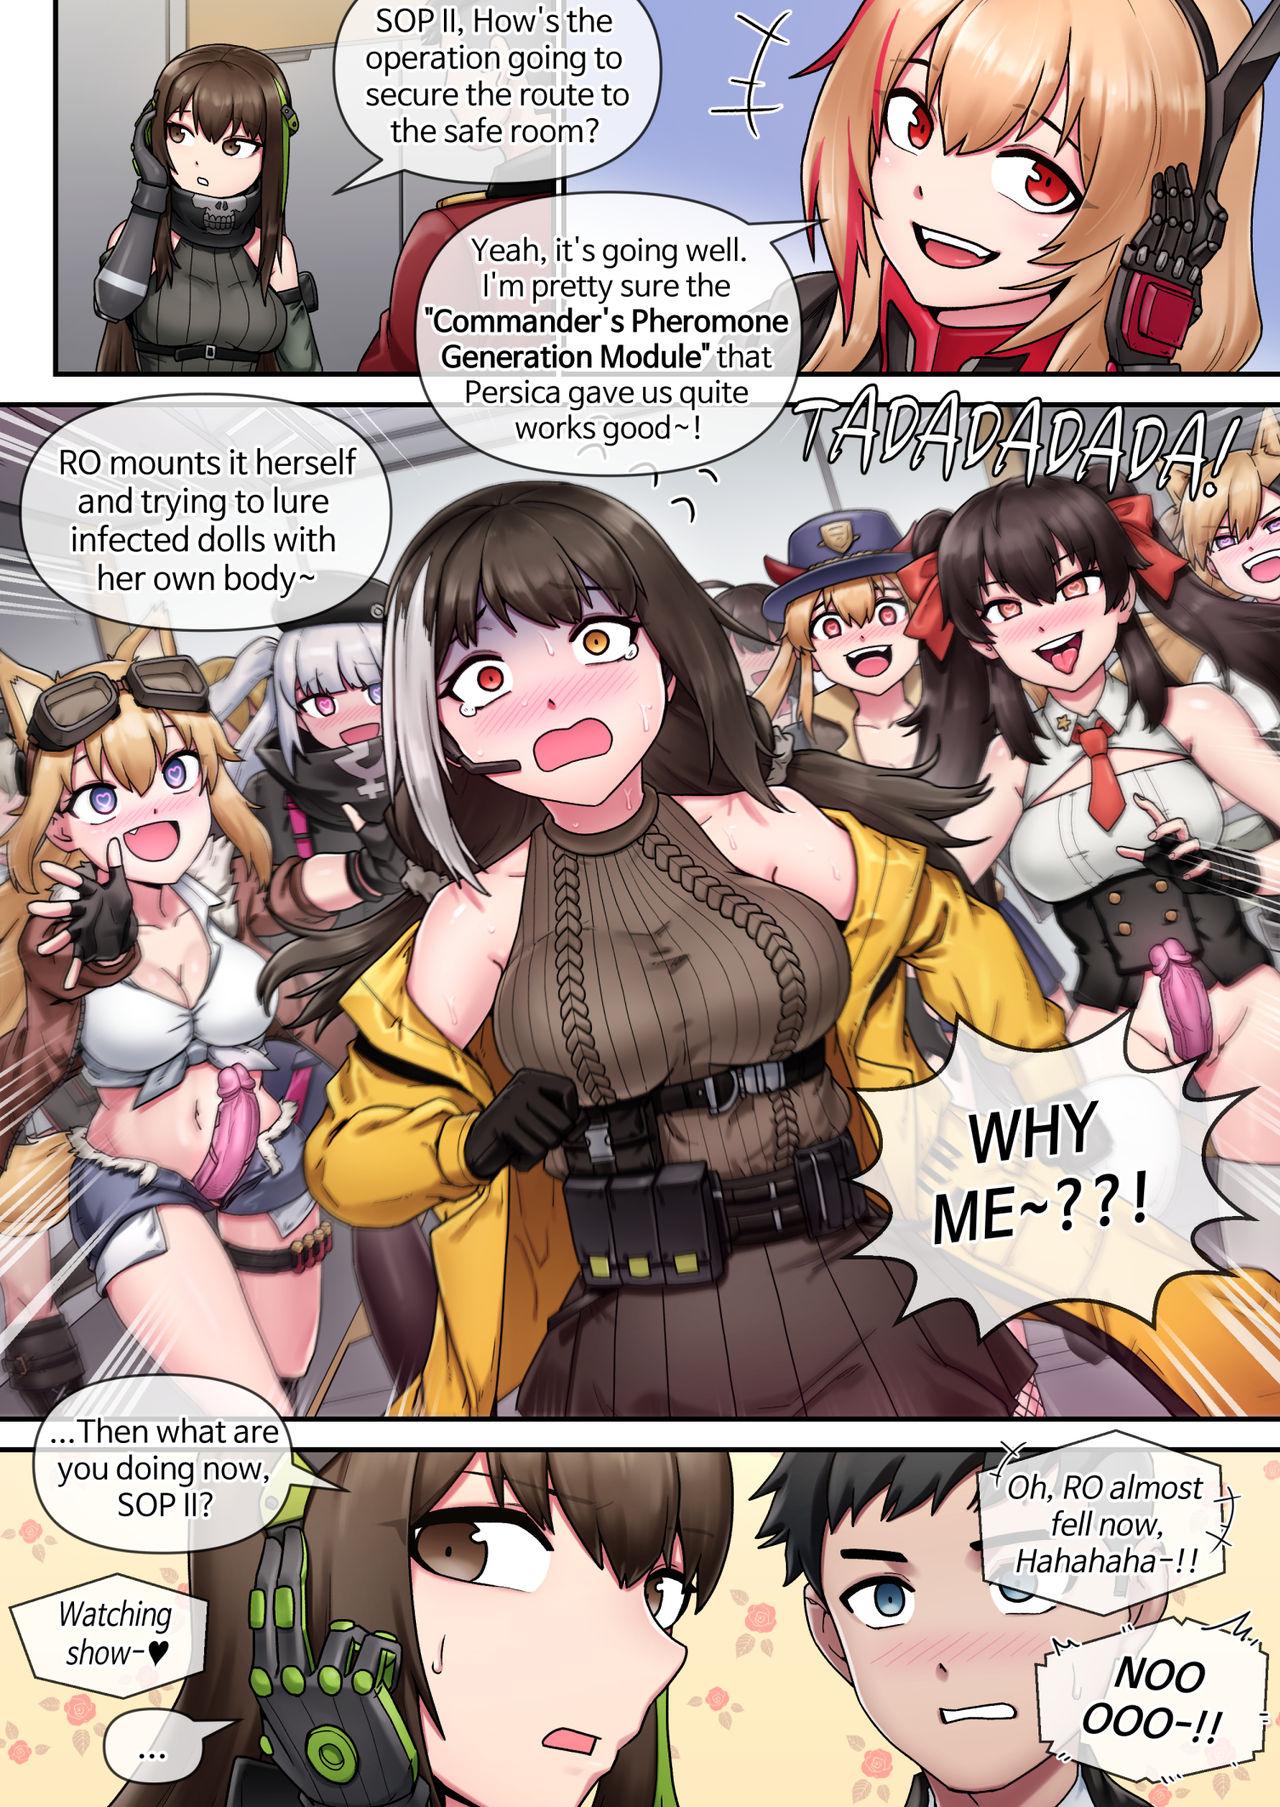 Licking My Only Princess - Girls frontline Hidden Cam - Page 5